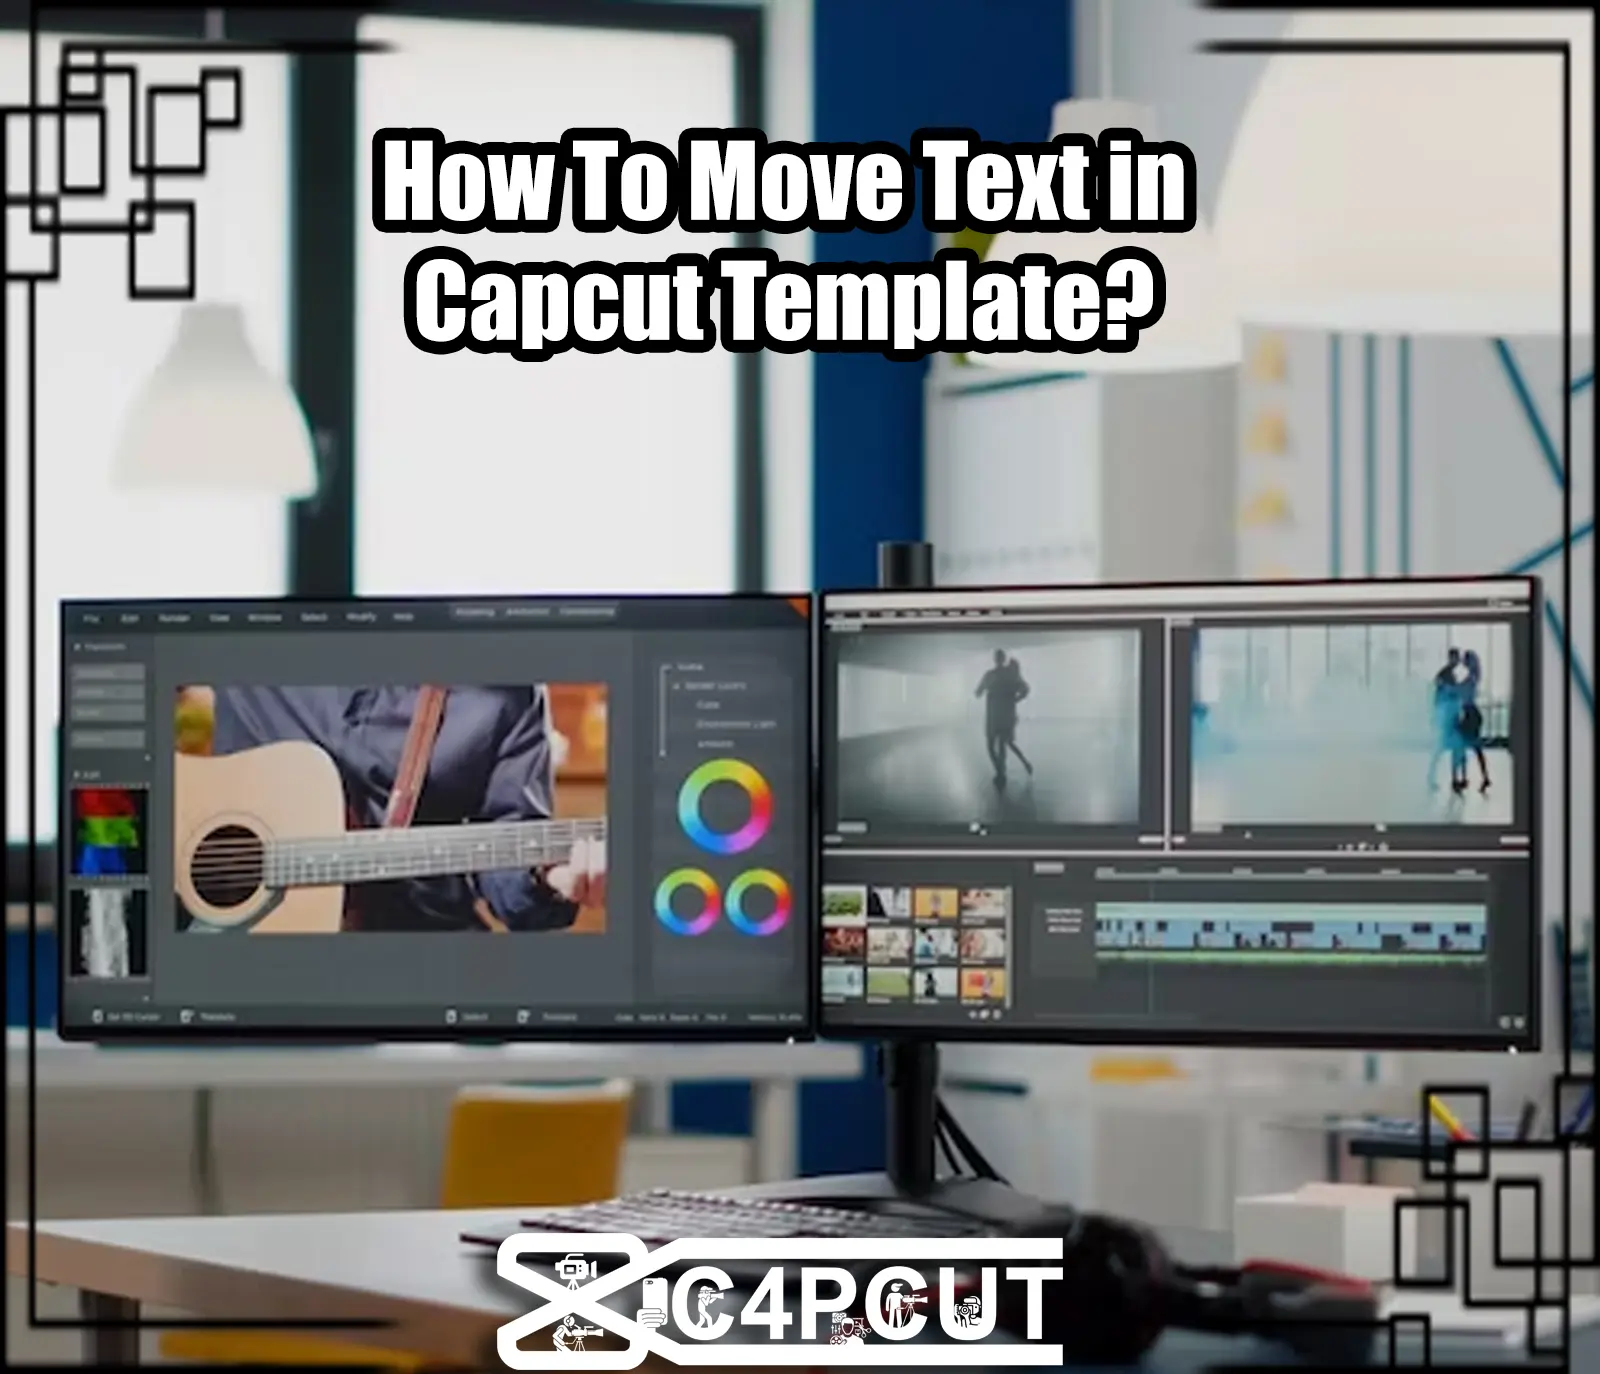 How To Move Text in Capcut Template?